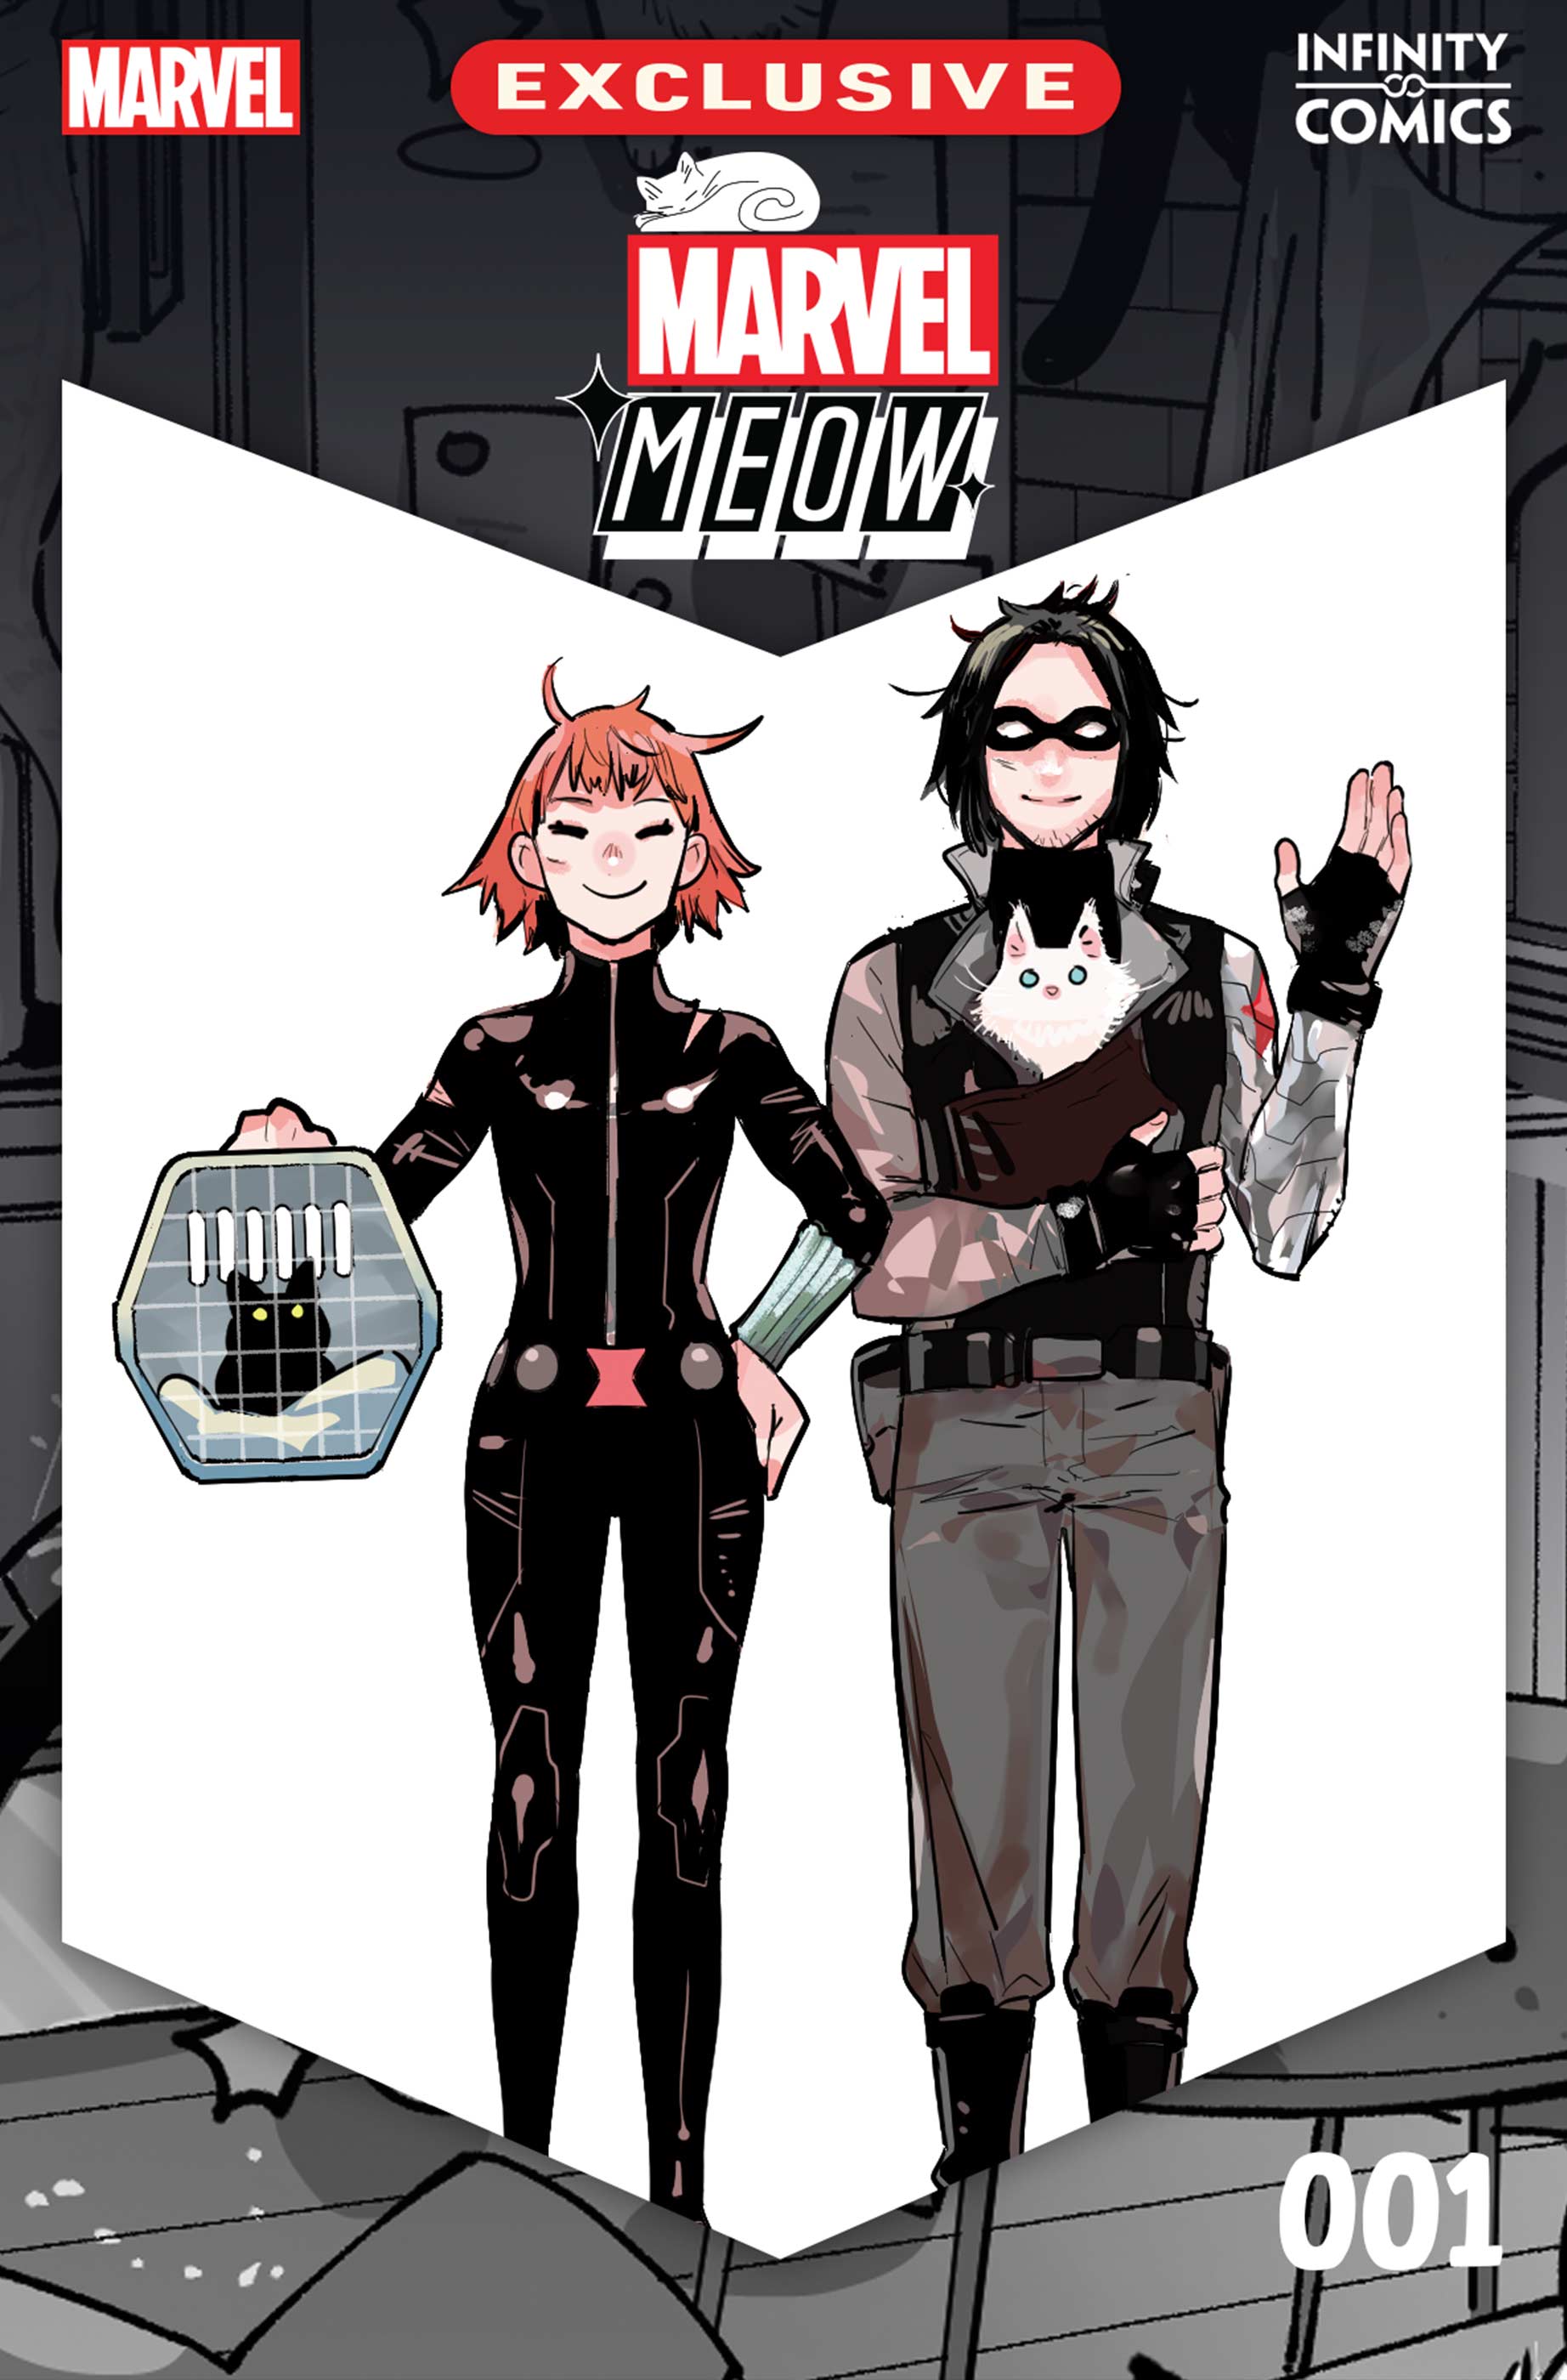 Read online Marvel Meow: Infinity Comic comic -  Issue #1 - 1